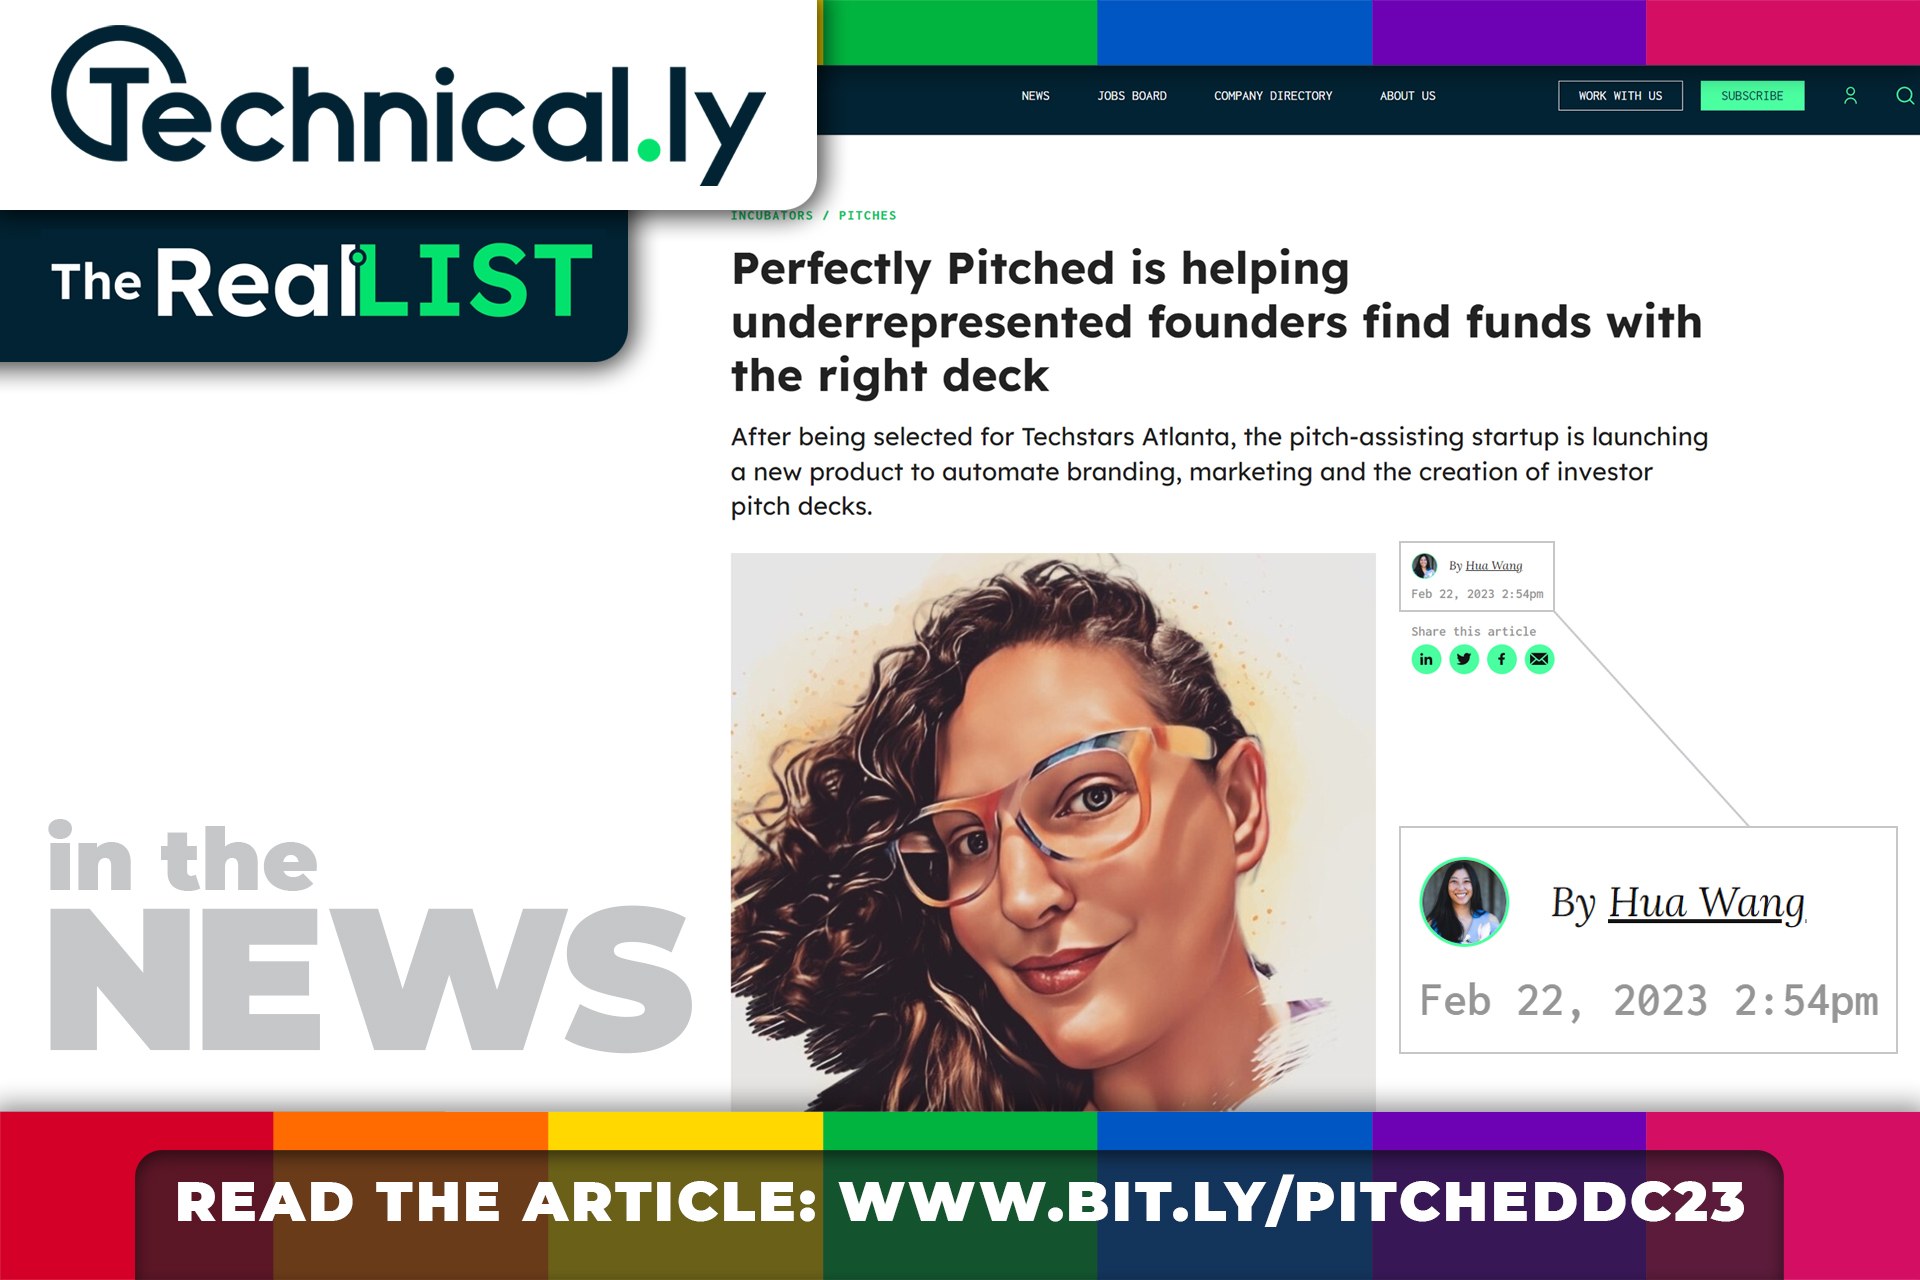 Perfectly Pitched In The News - Technical.ly The Real List names Perfectly Pitched one of the Top 20 Startups to Watch in DC, and posts a profile of our company & founder! Read the article at www.bit.ly/pitcheddc23